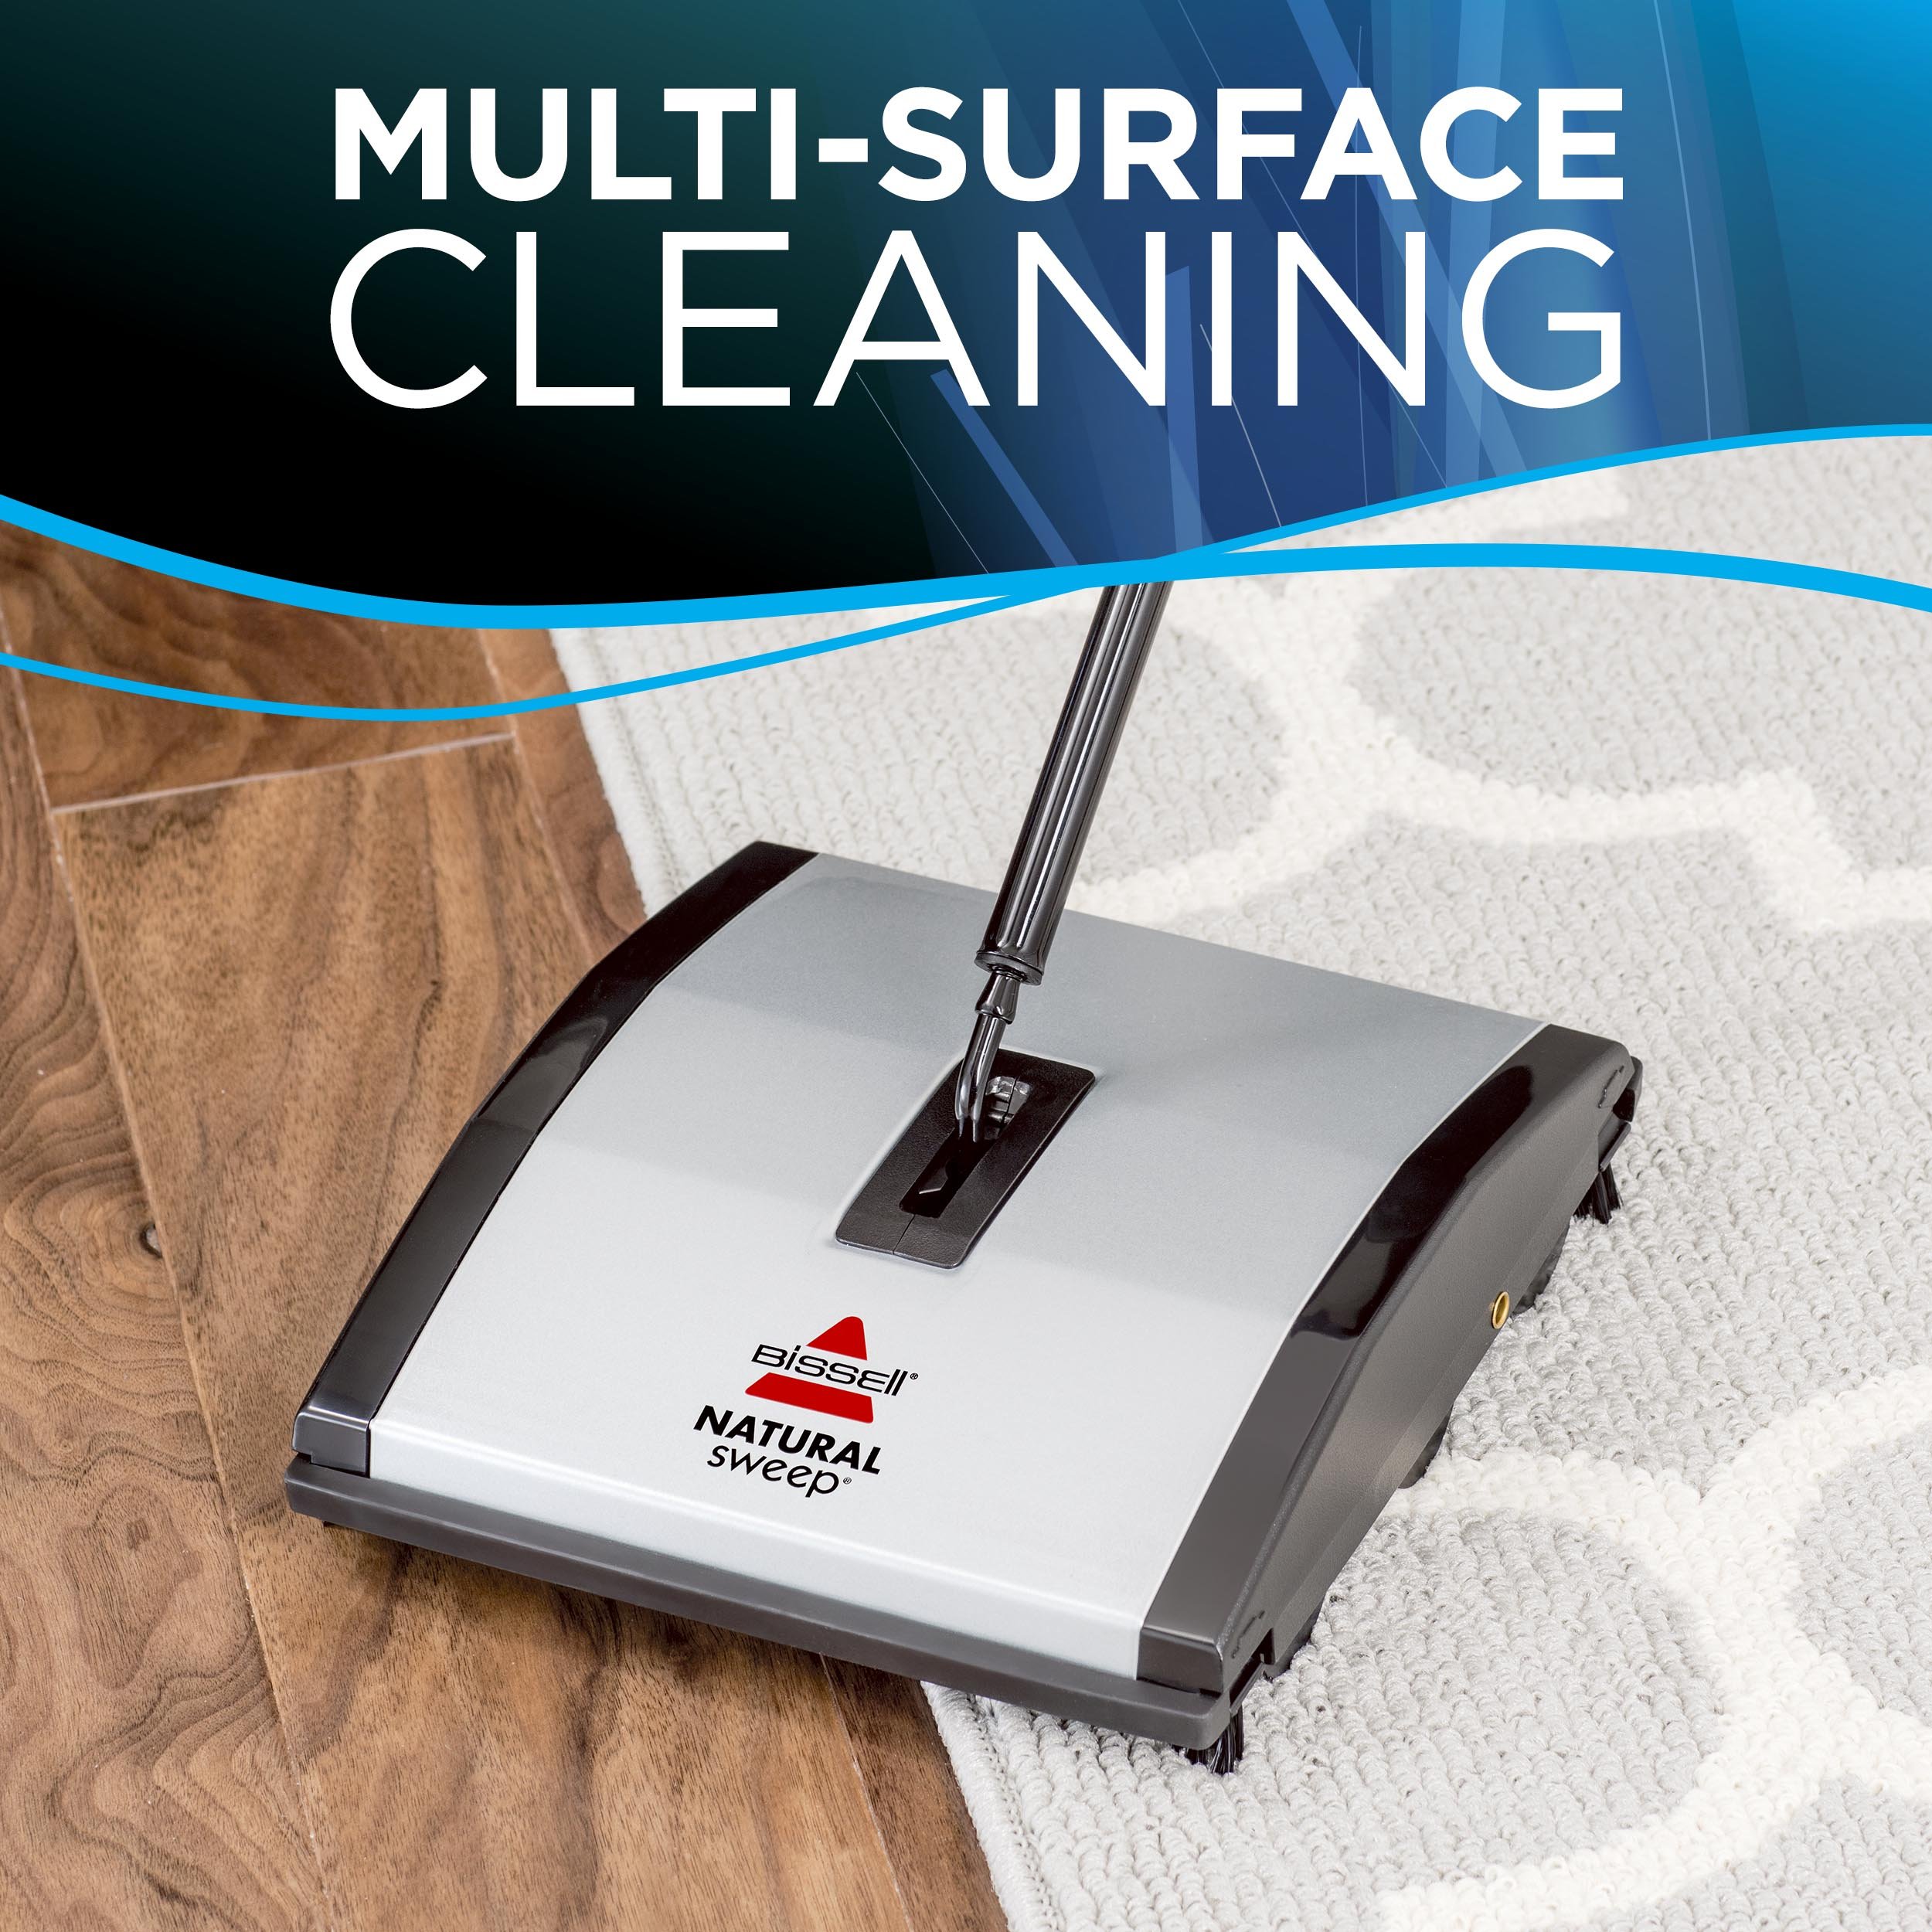 Bissell Natural Sweep Carpet and Floor Sweeper with Dual Rotating System and 2 Corner Edge Brushes, 92N0A, 4, Silver